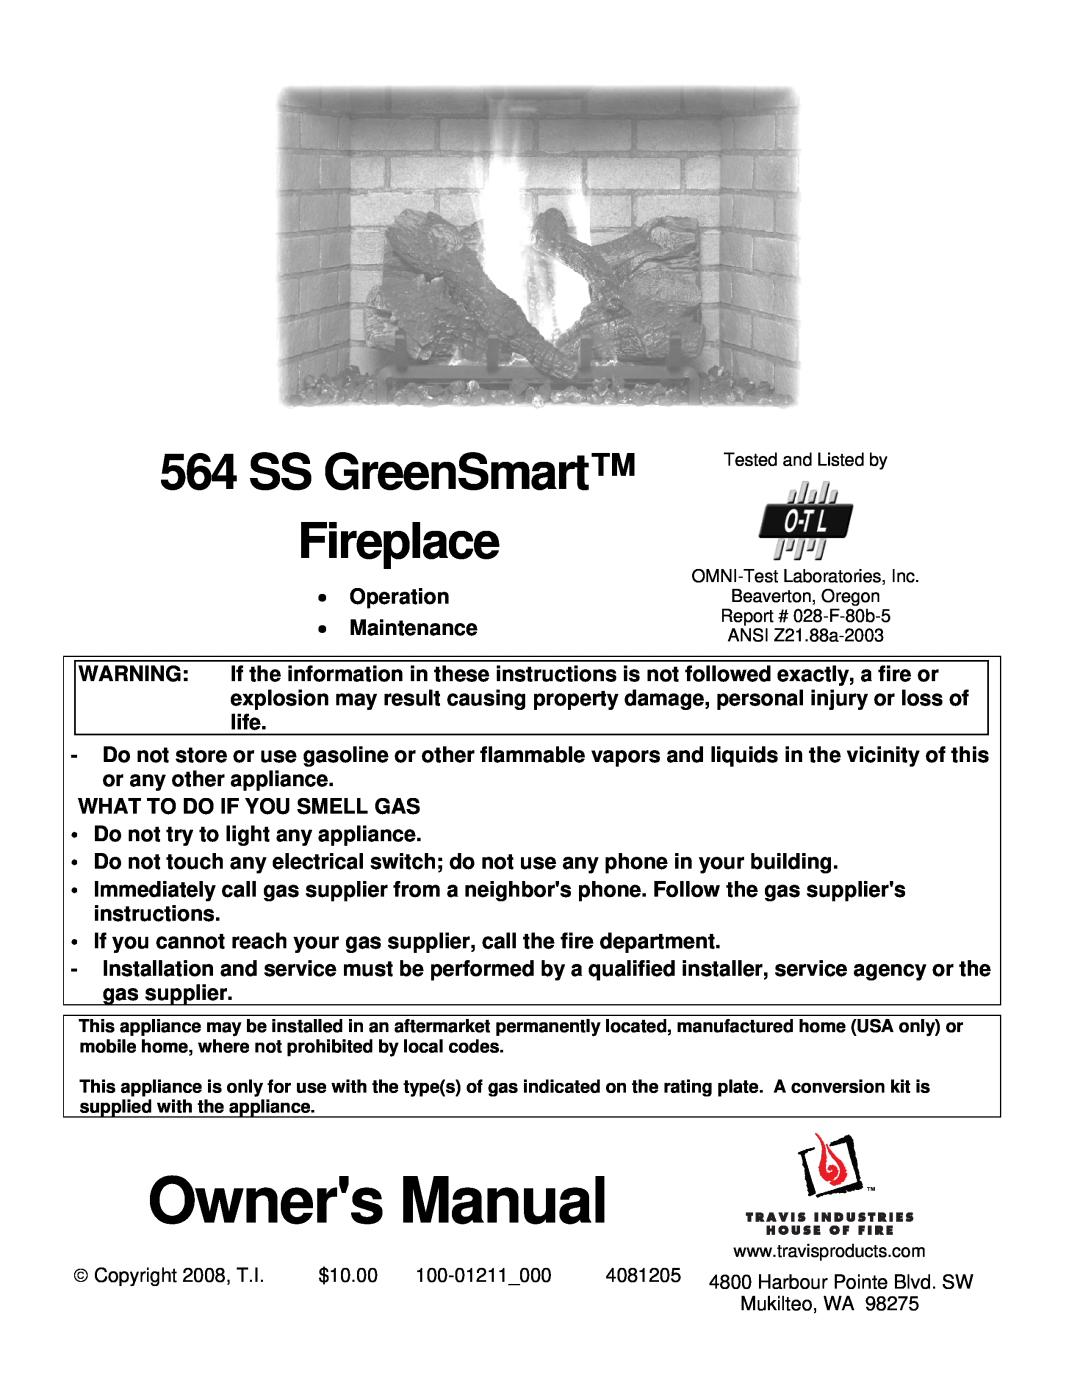 Avalon Stoves 564 SS owner manual SS GreenSmart, Fireplace 